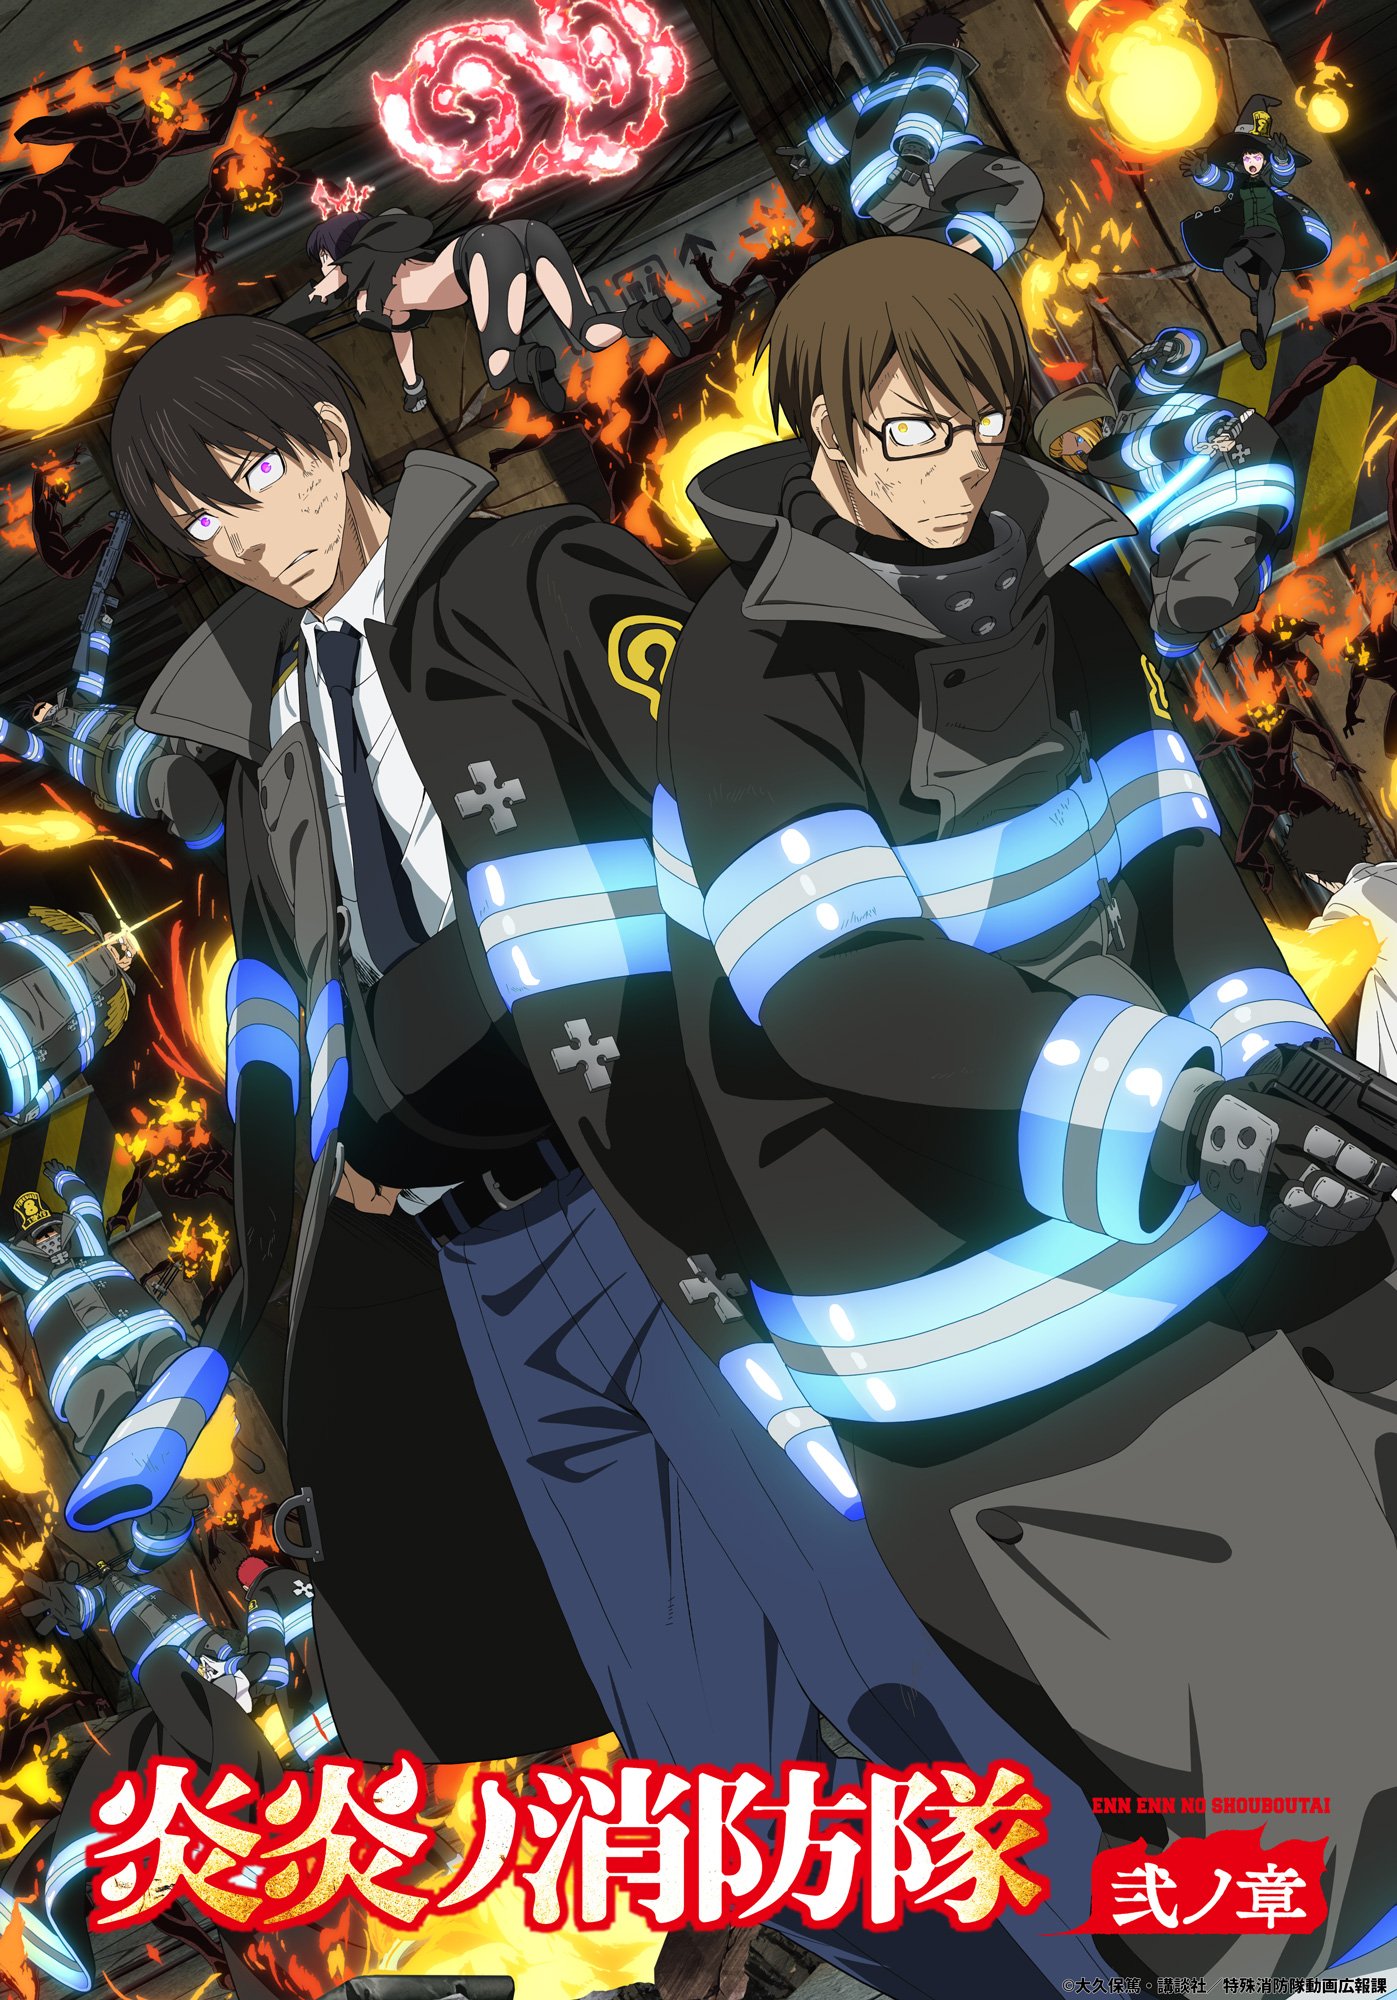 Anime News And Facts on X: Fire Force Season 2 New Key Visual for Upcoming  Arc 🔥🔥  / X